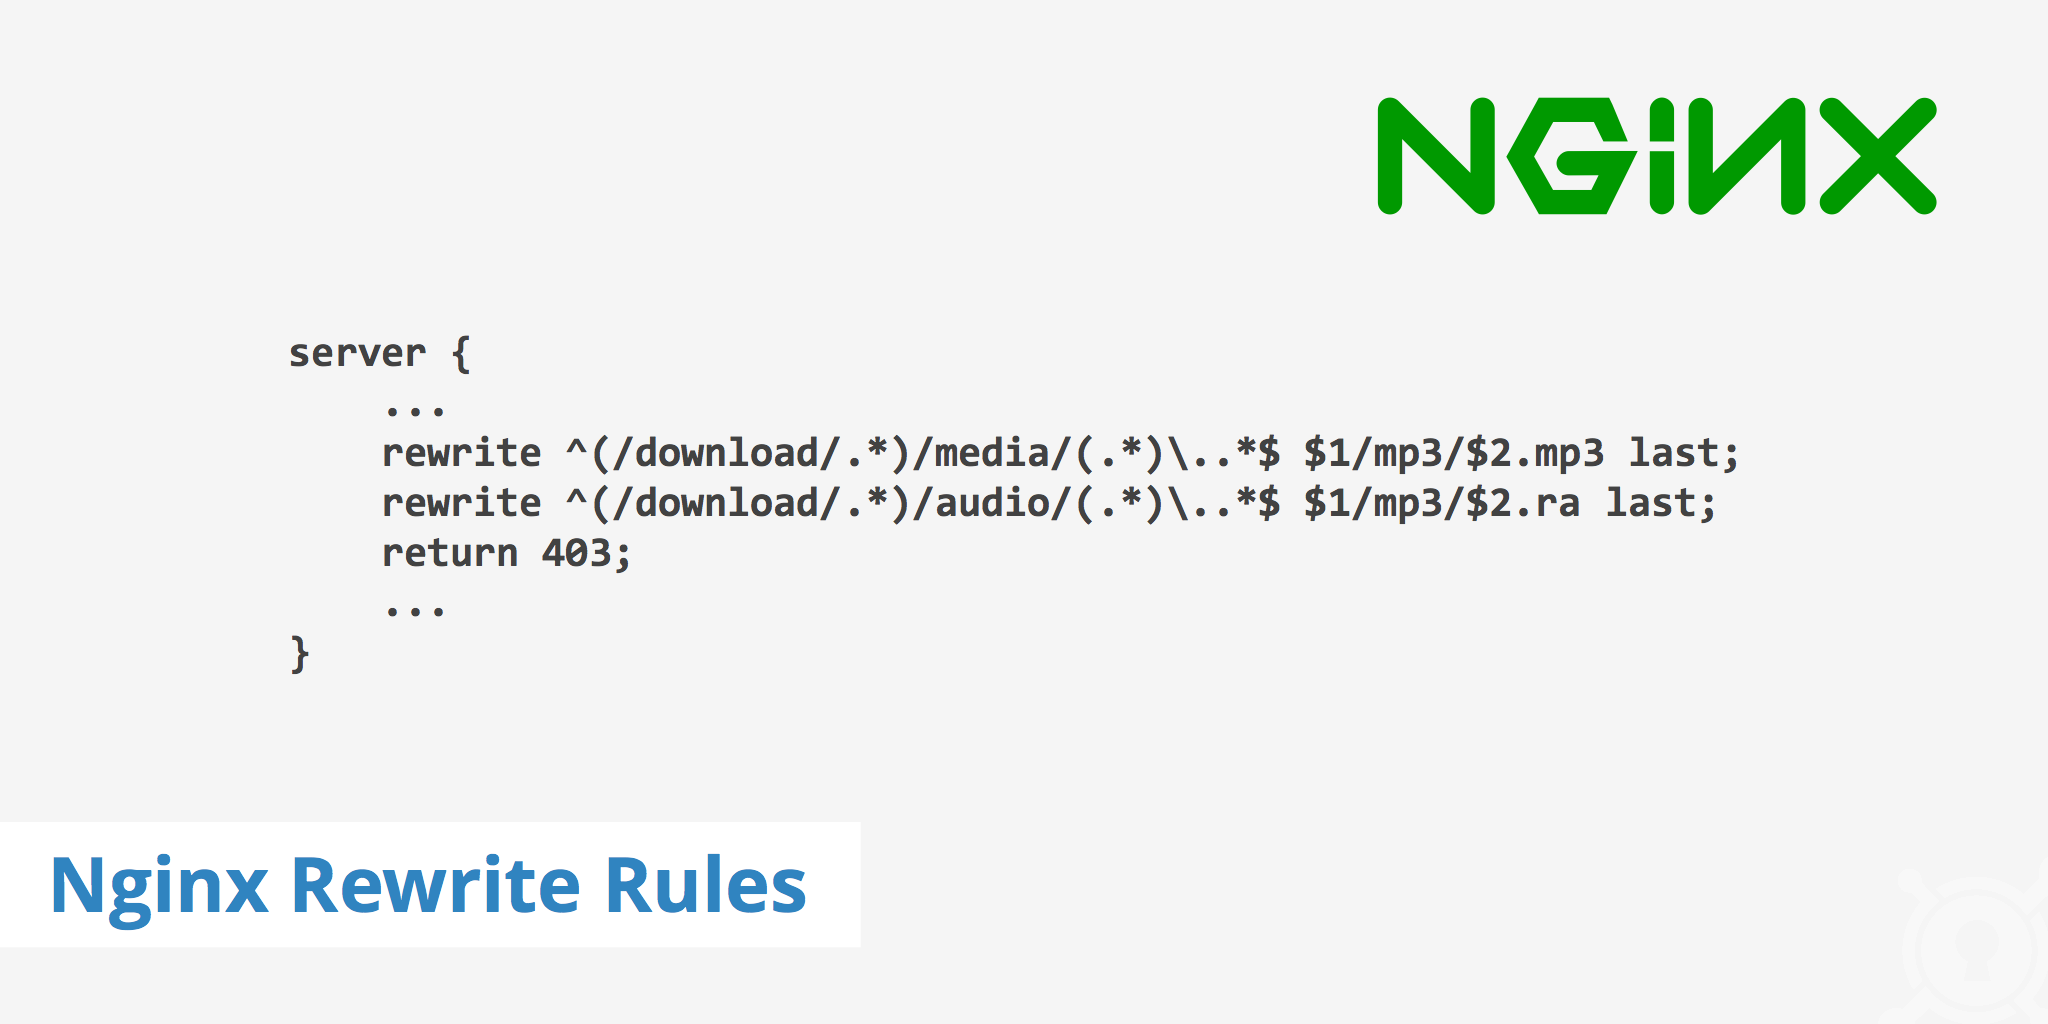 nginx redirect to another url